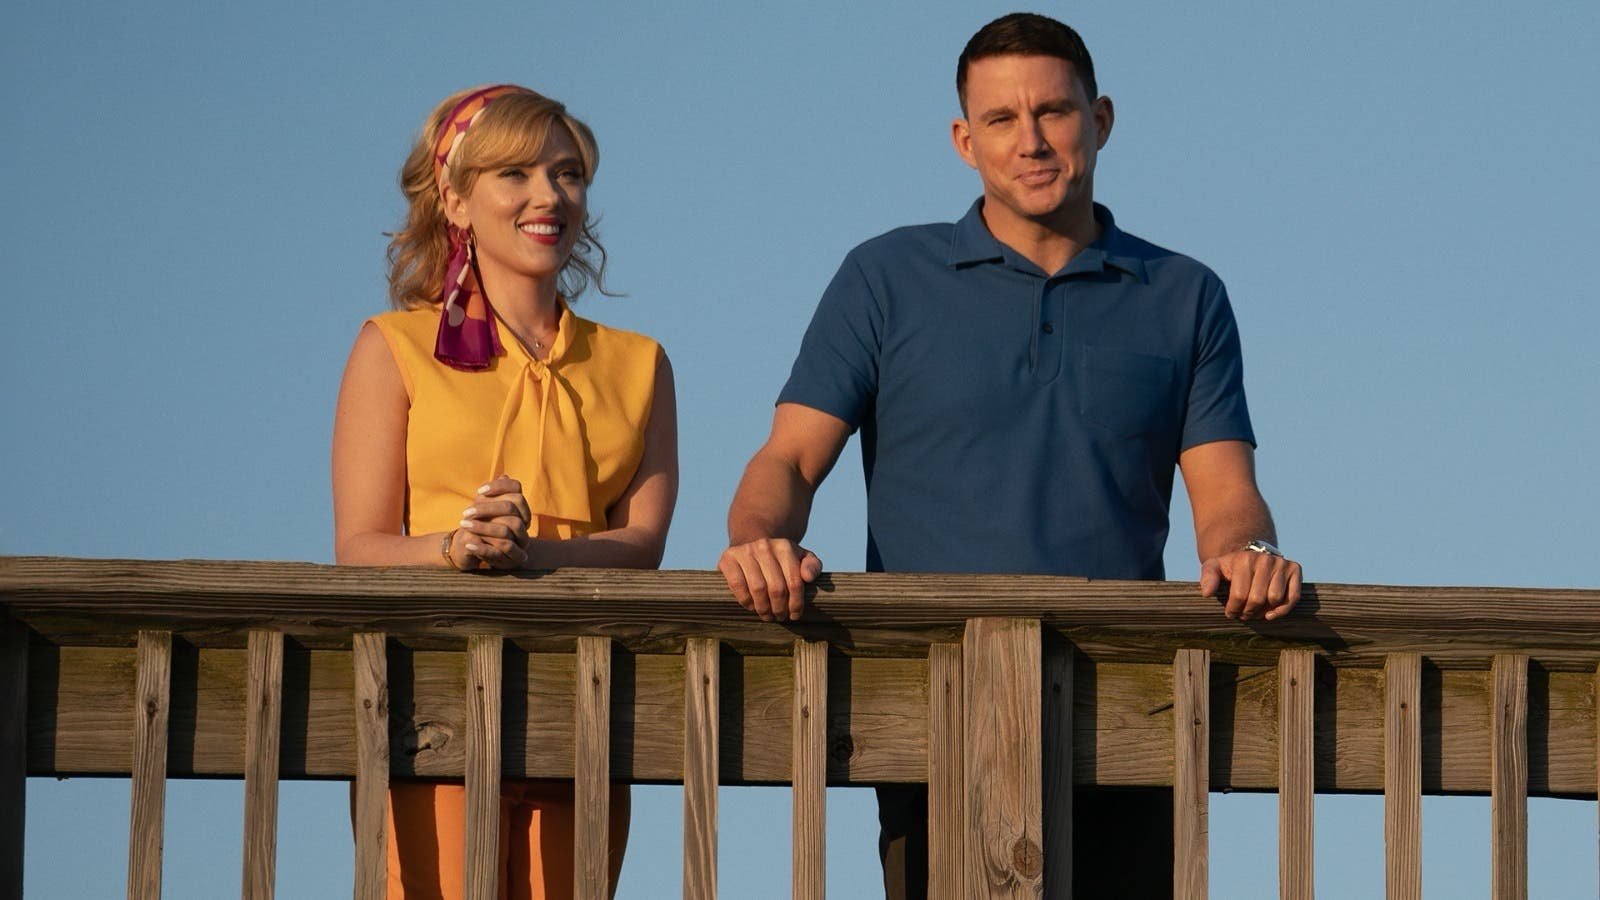 Scarlett Johansson Teams Up with Channing Tatum in Fly Me to the Moon